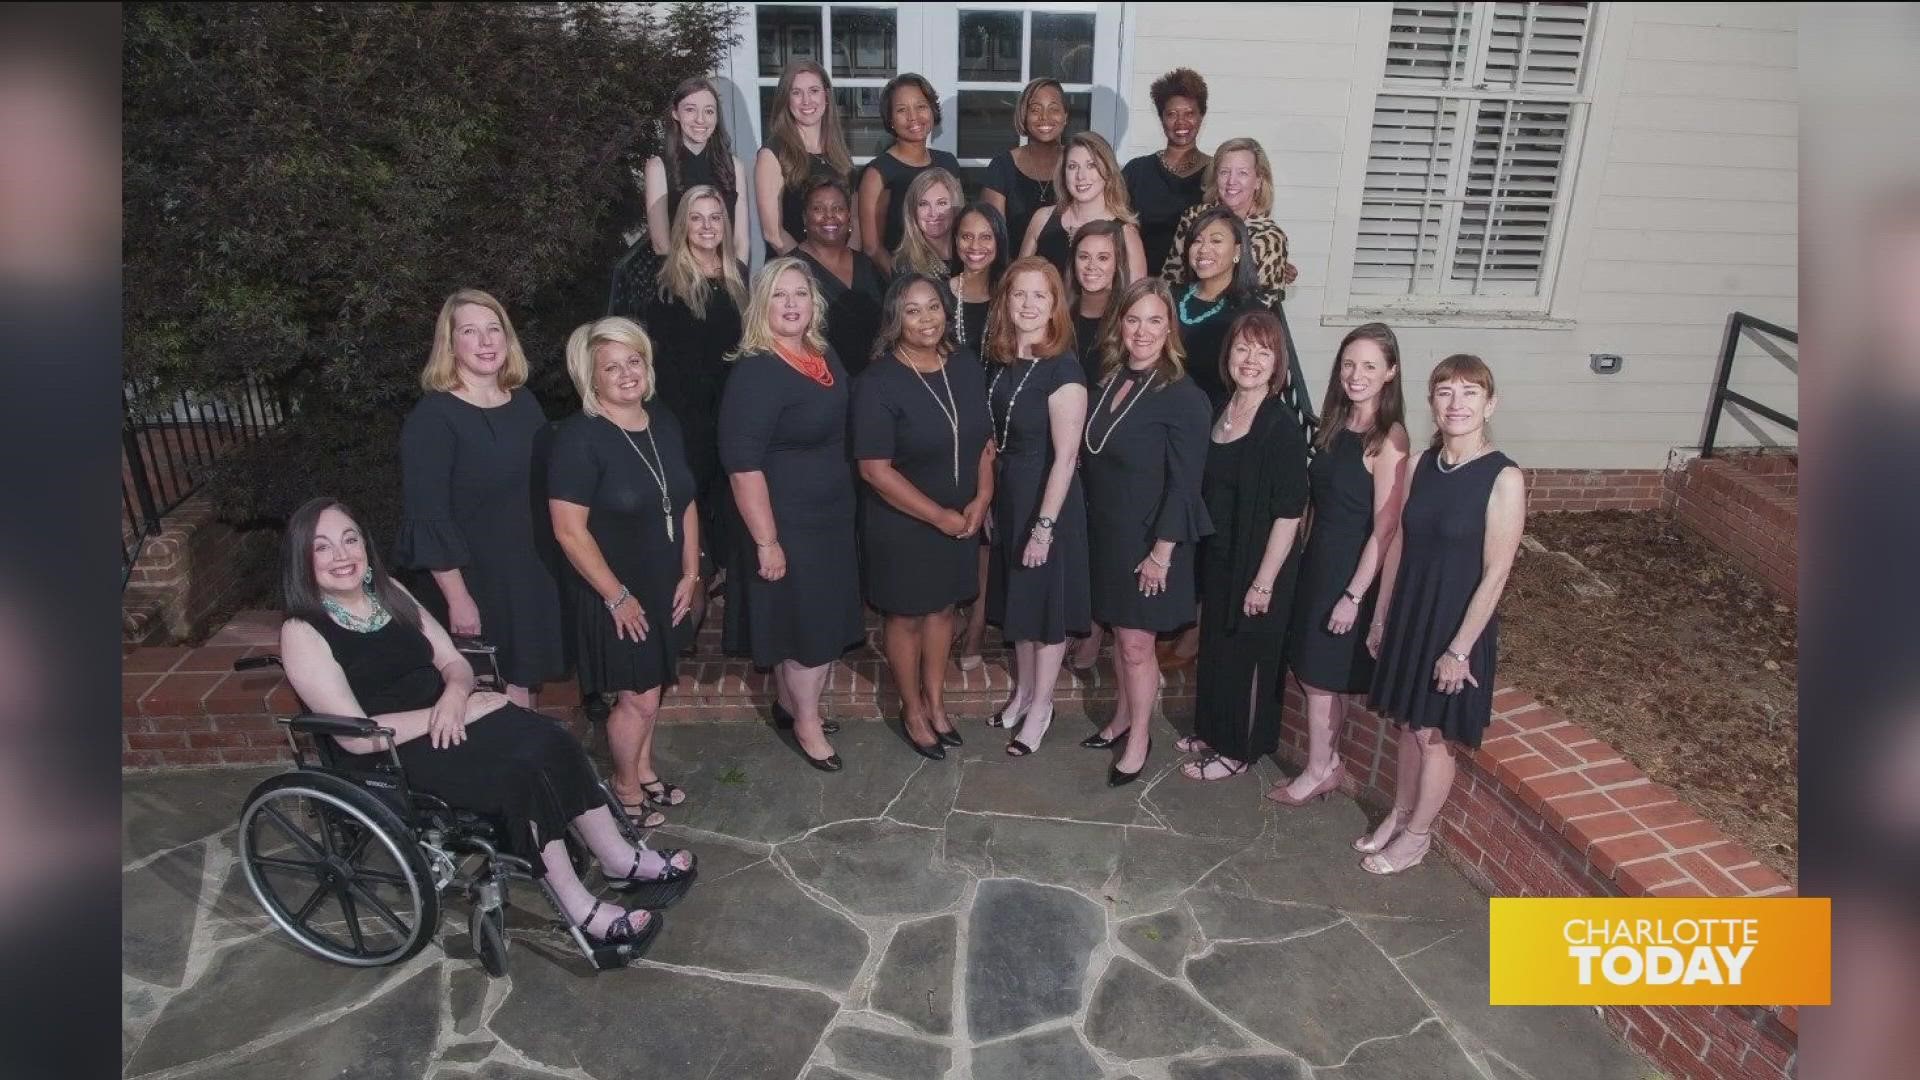 Junior League of Charlotte will wear the same black dress every day for five consecutive days